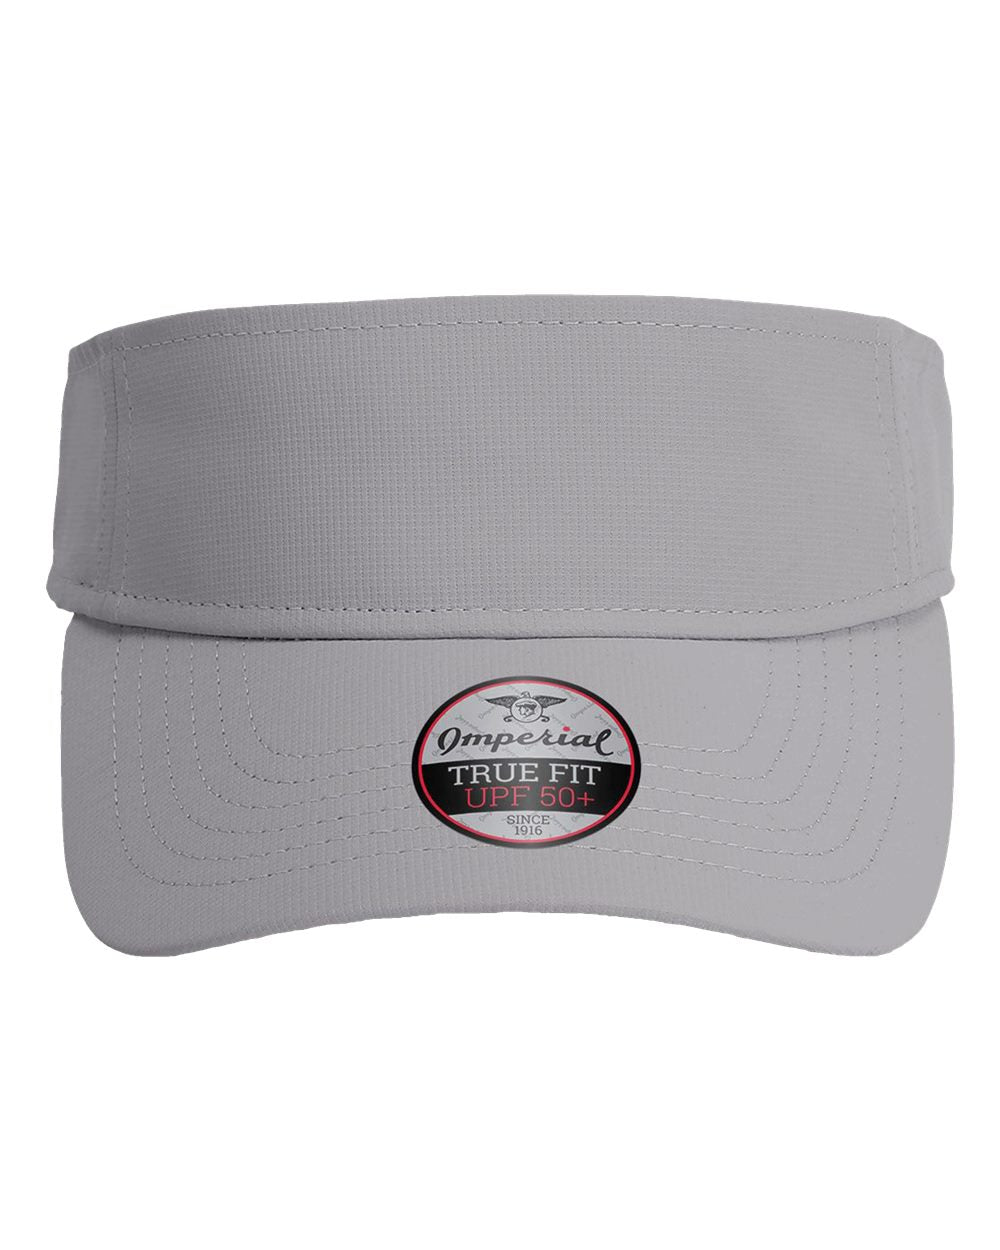 Imperial Golf Visor with laser engraved dark brown patch business logo